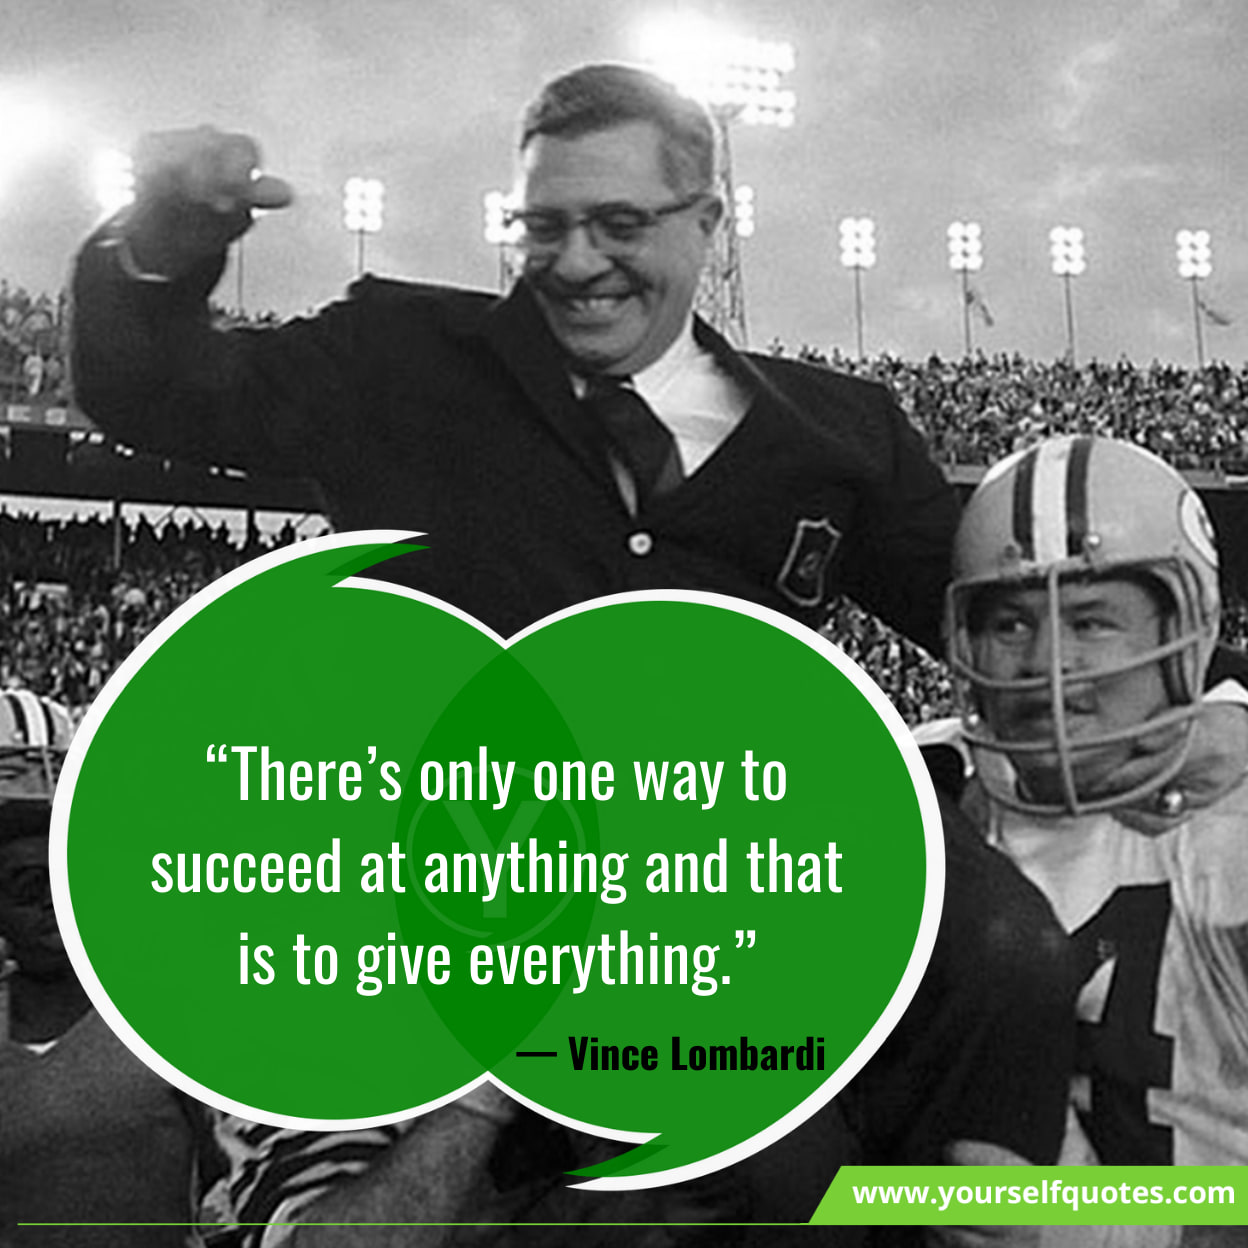 Vince Lombardi Quotes for Success